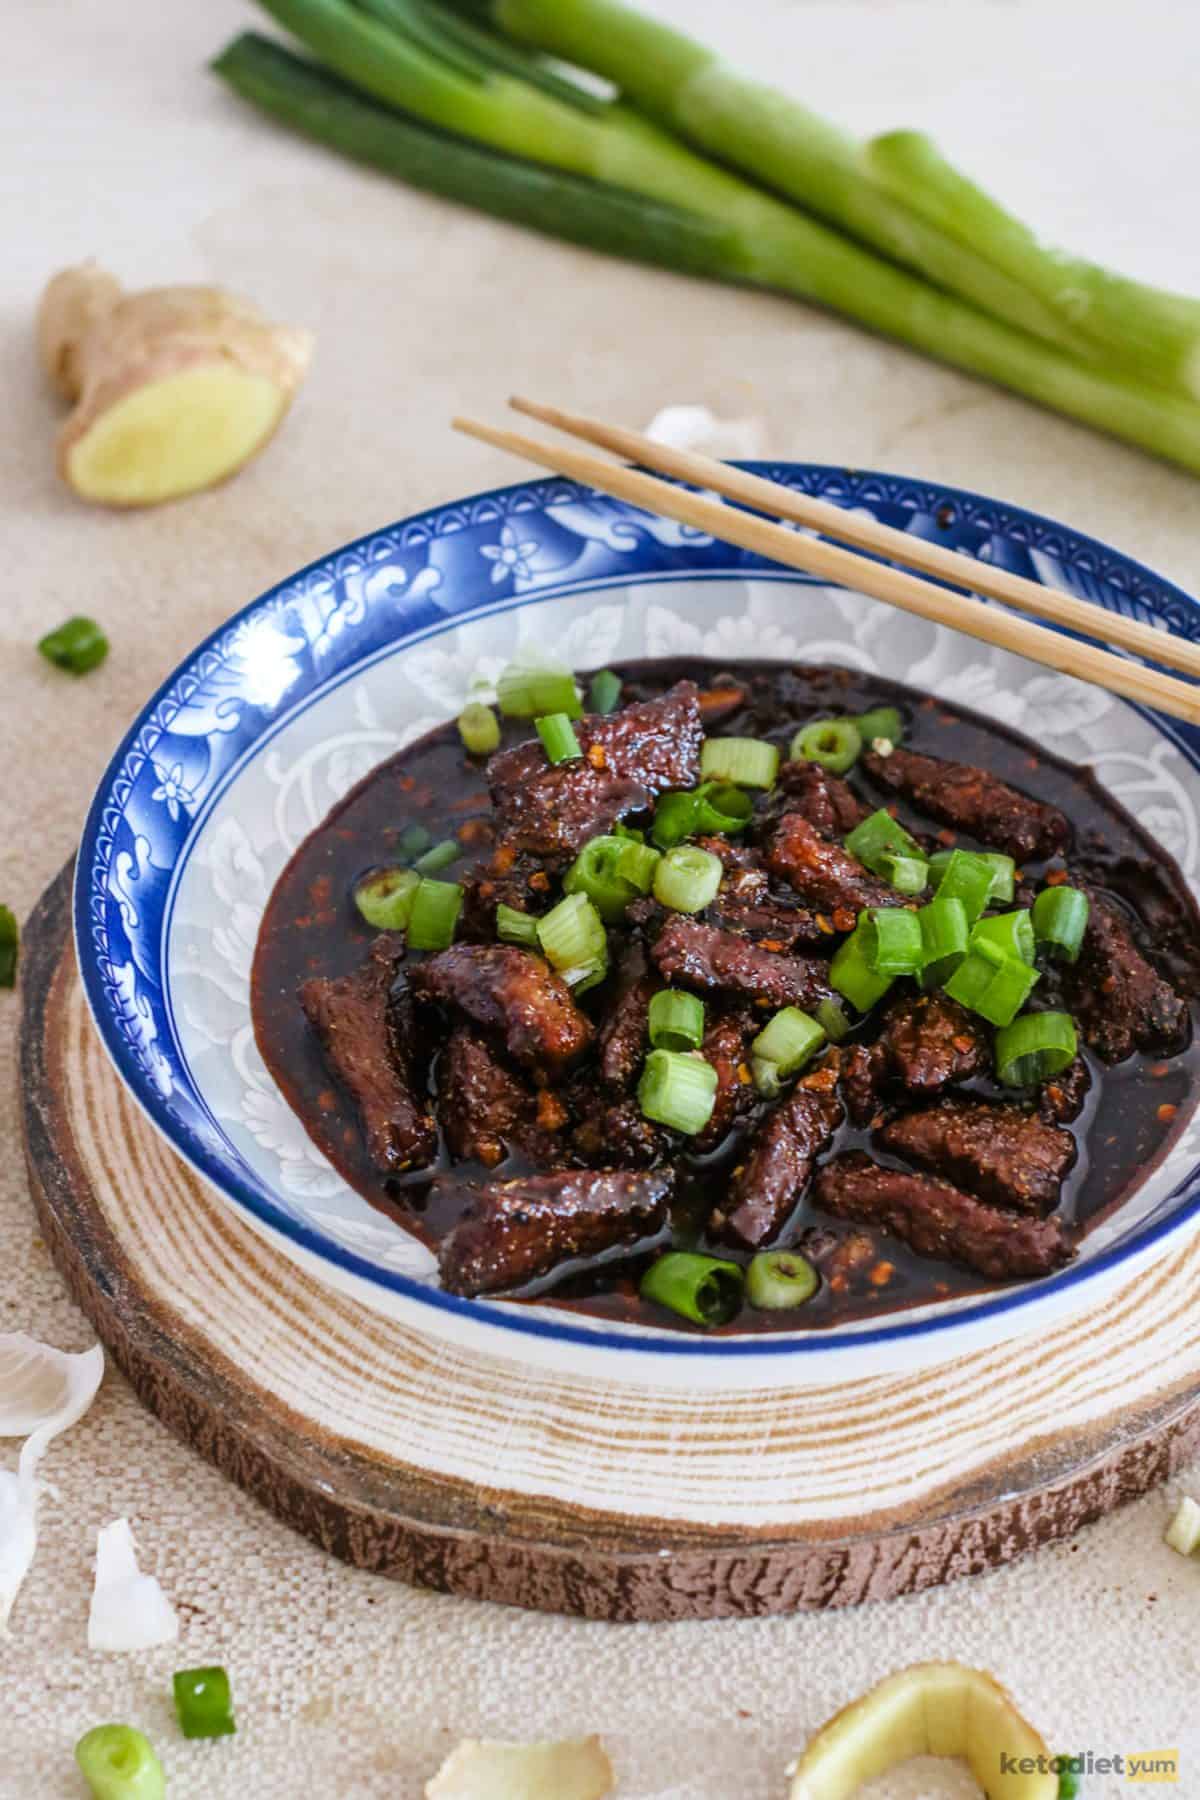 Keto Mongolian beef recipe that is just as delicious as Chinese takeout without the carbs!